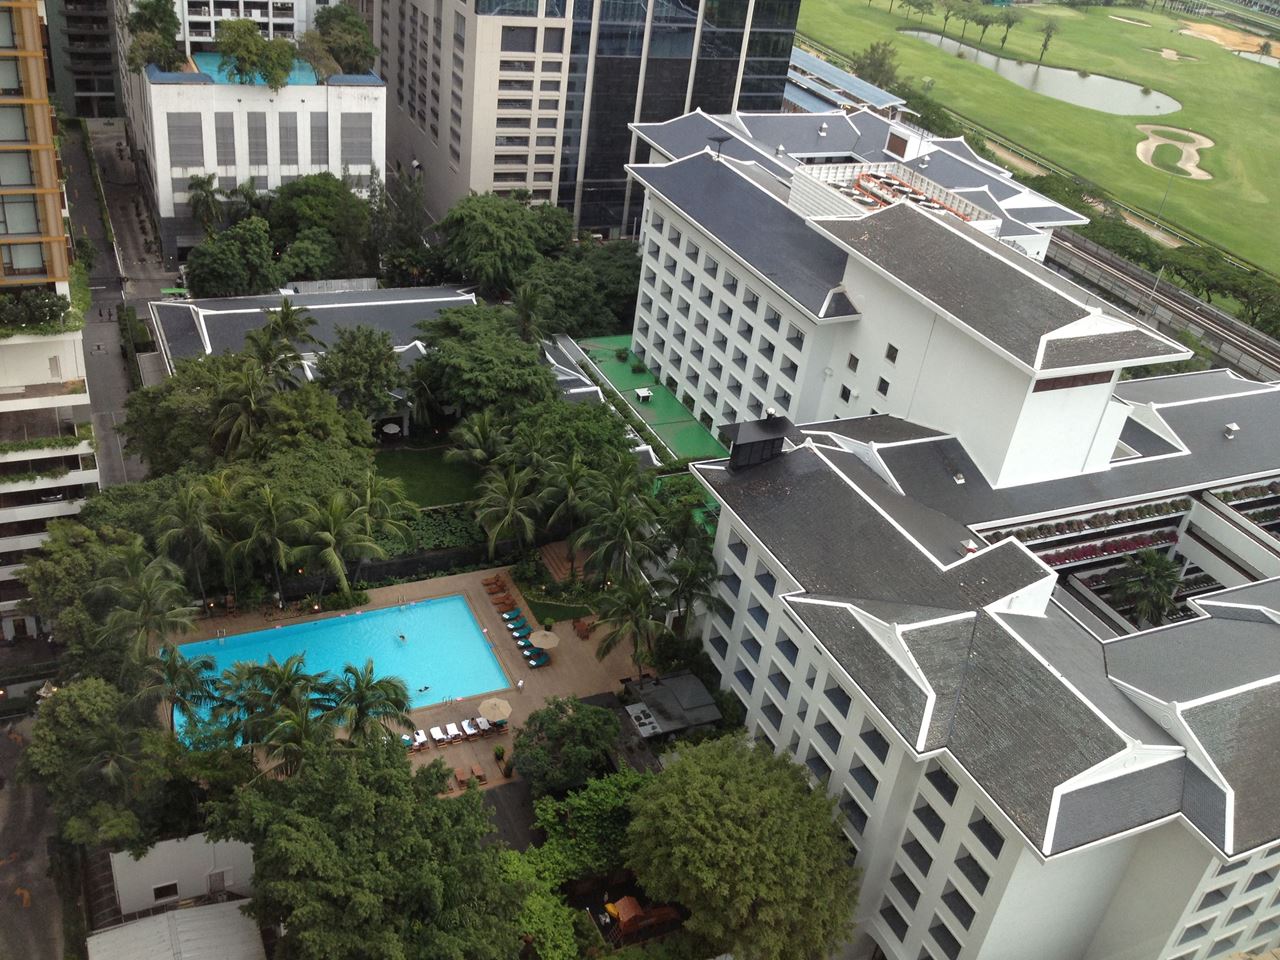 Our stay at Grande Centre Point Hotel Bangkok Thailand